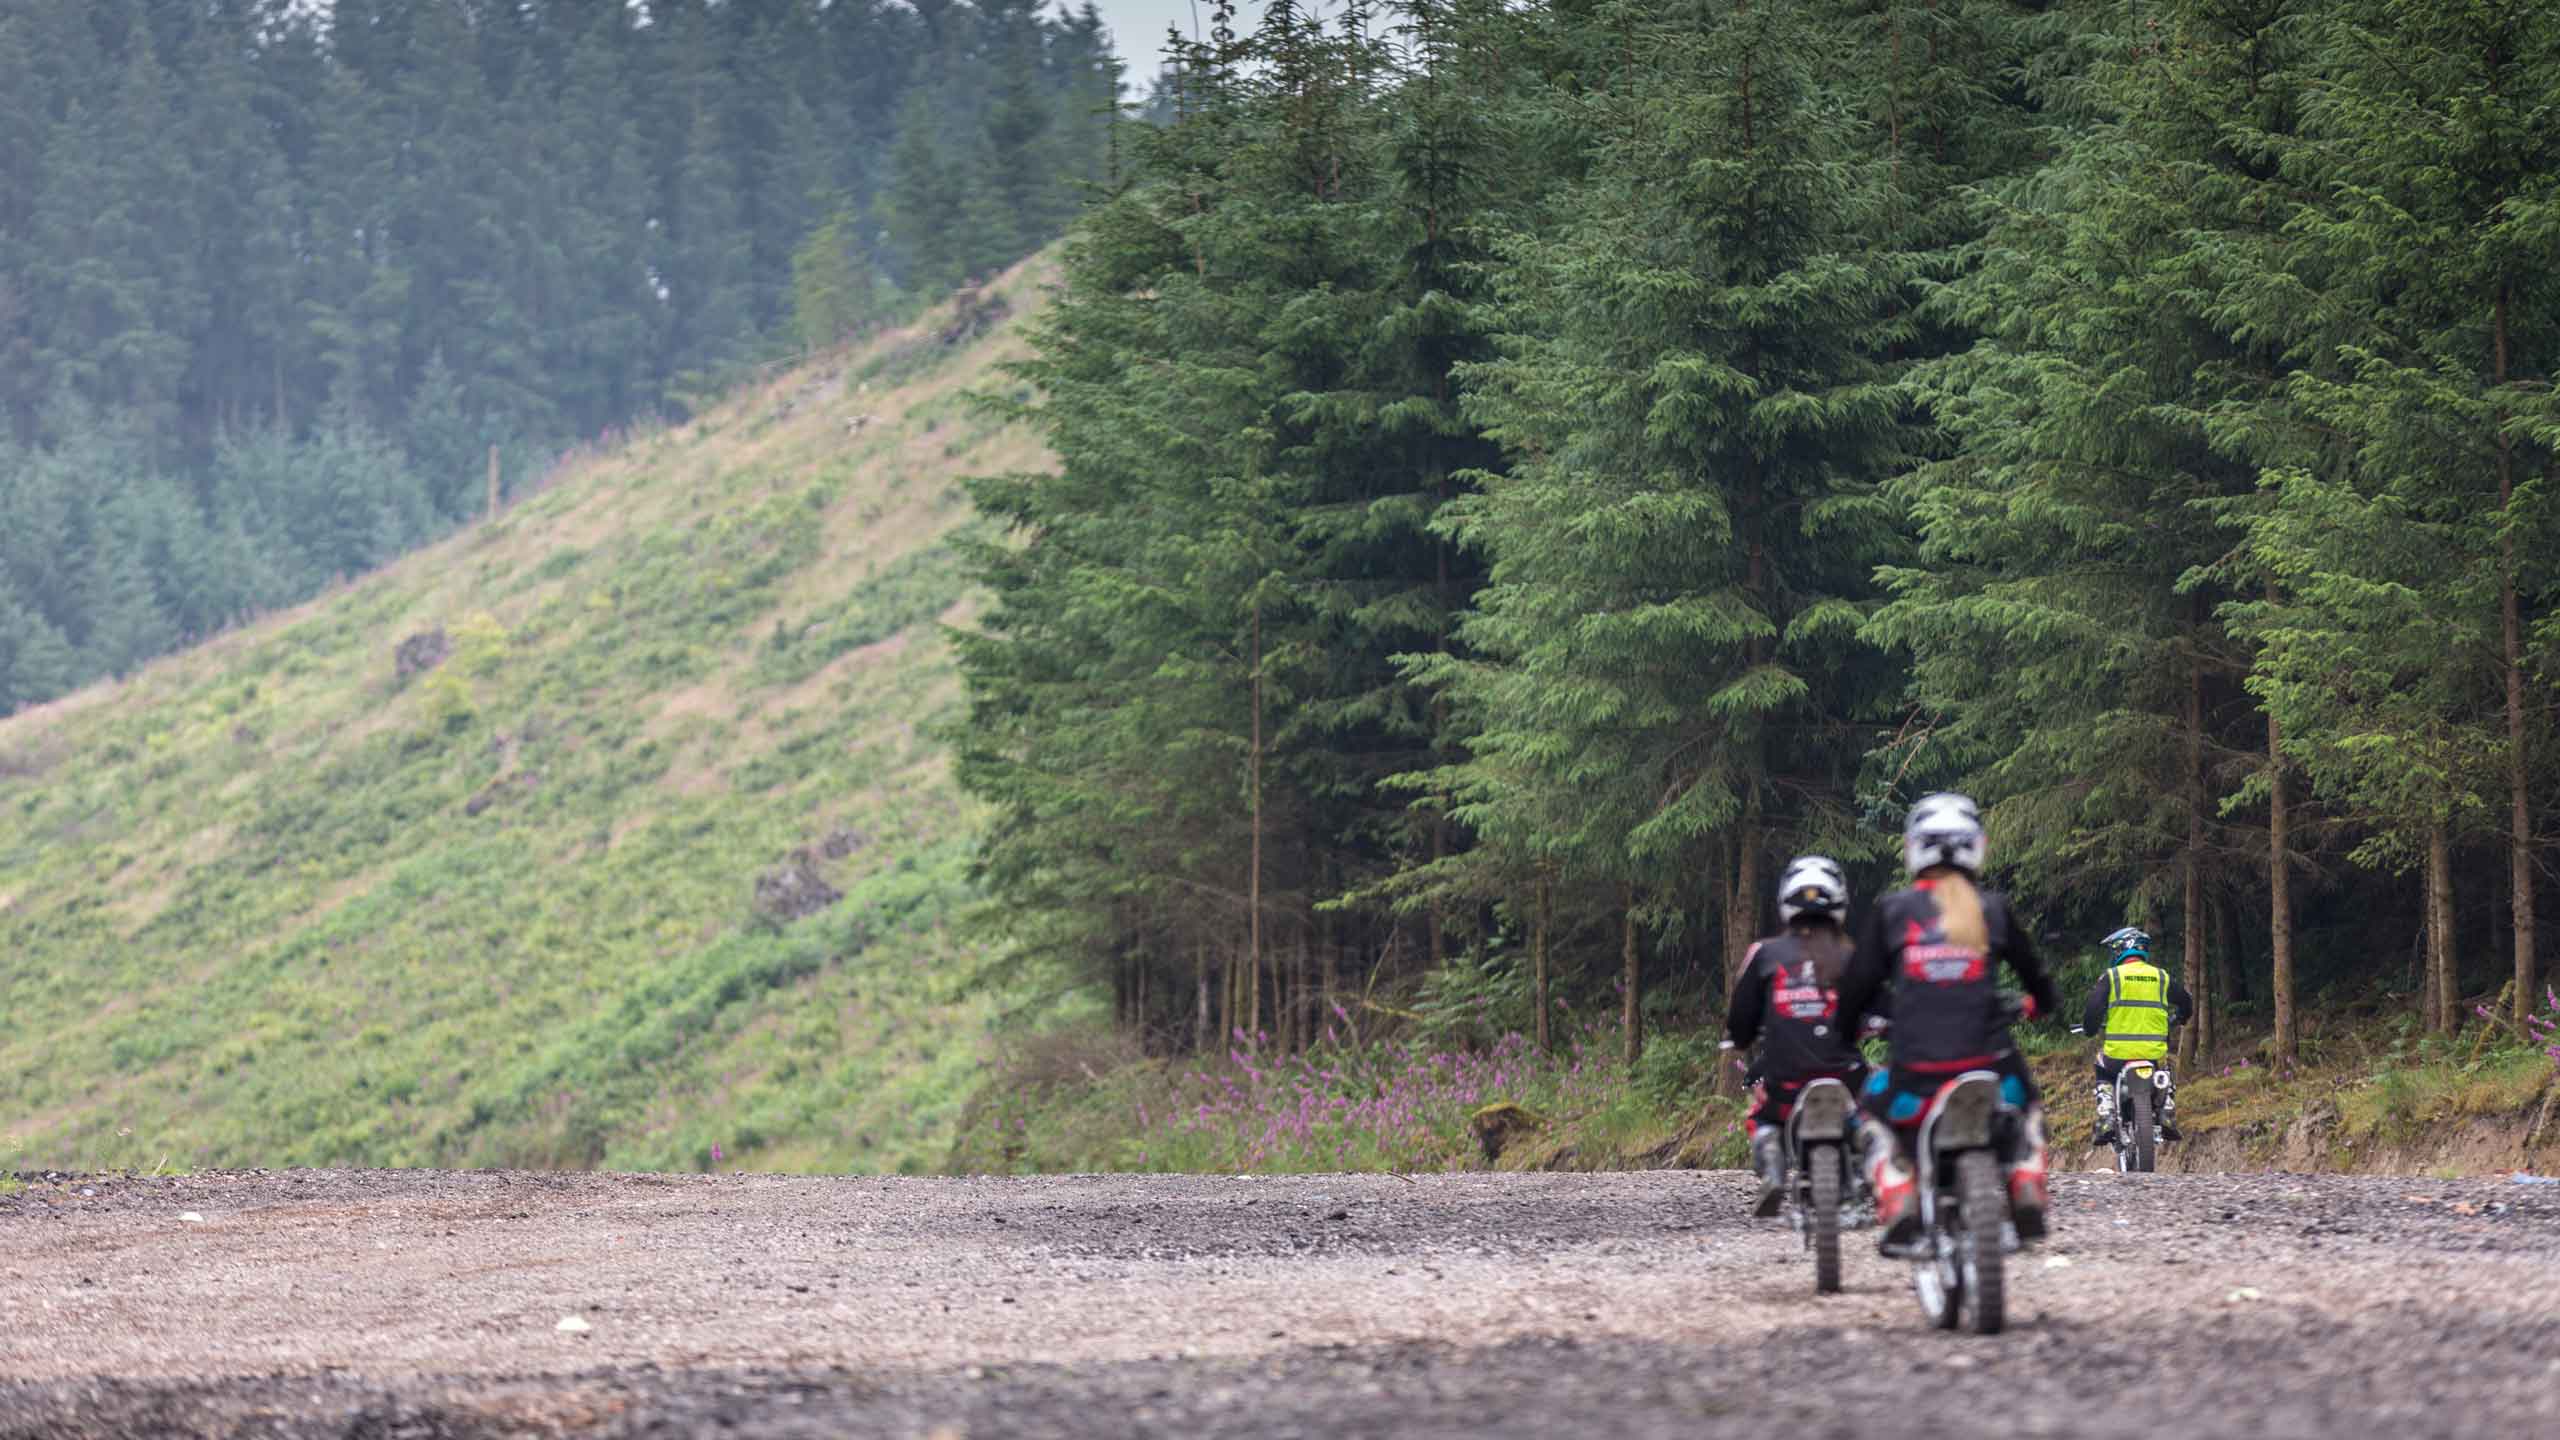 Riders in wooded area at the Dave Thorpe Honda Off-Road Centre